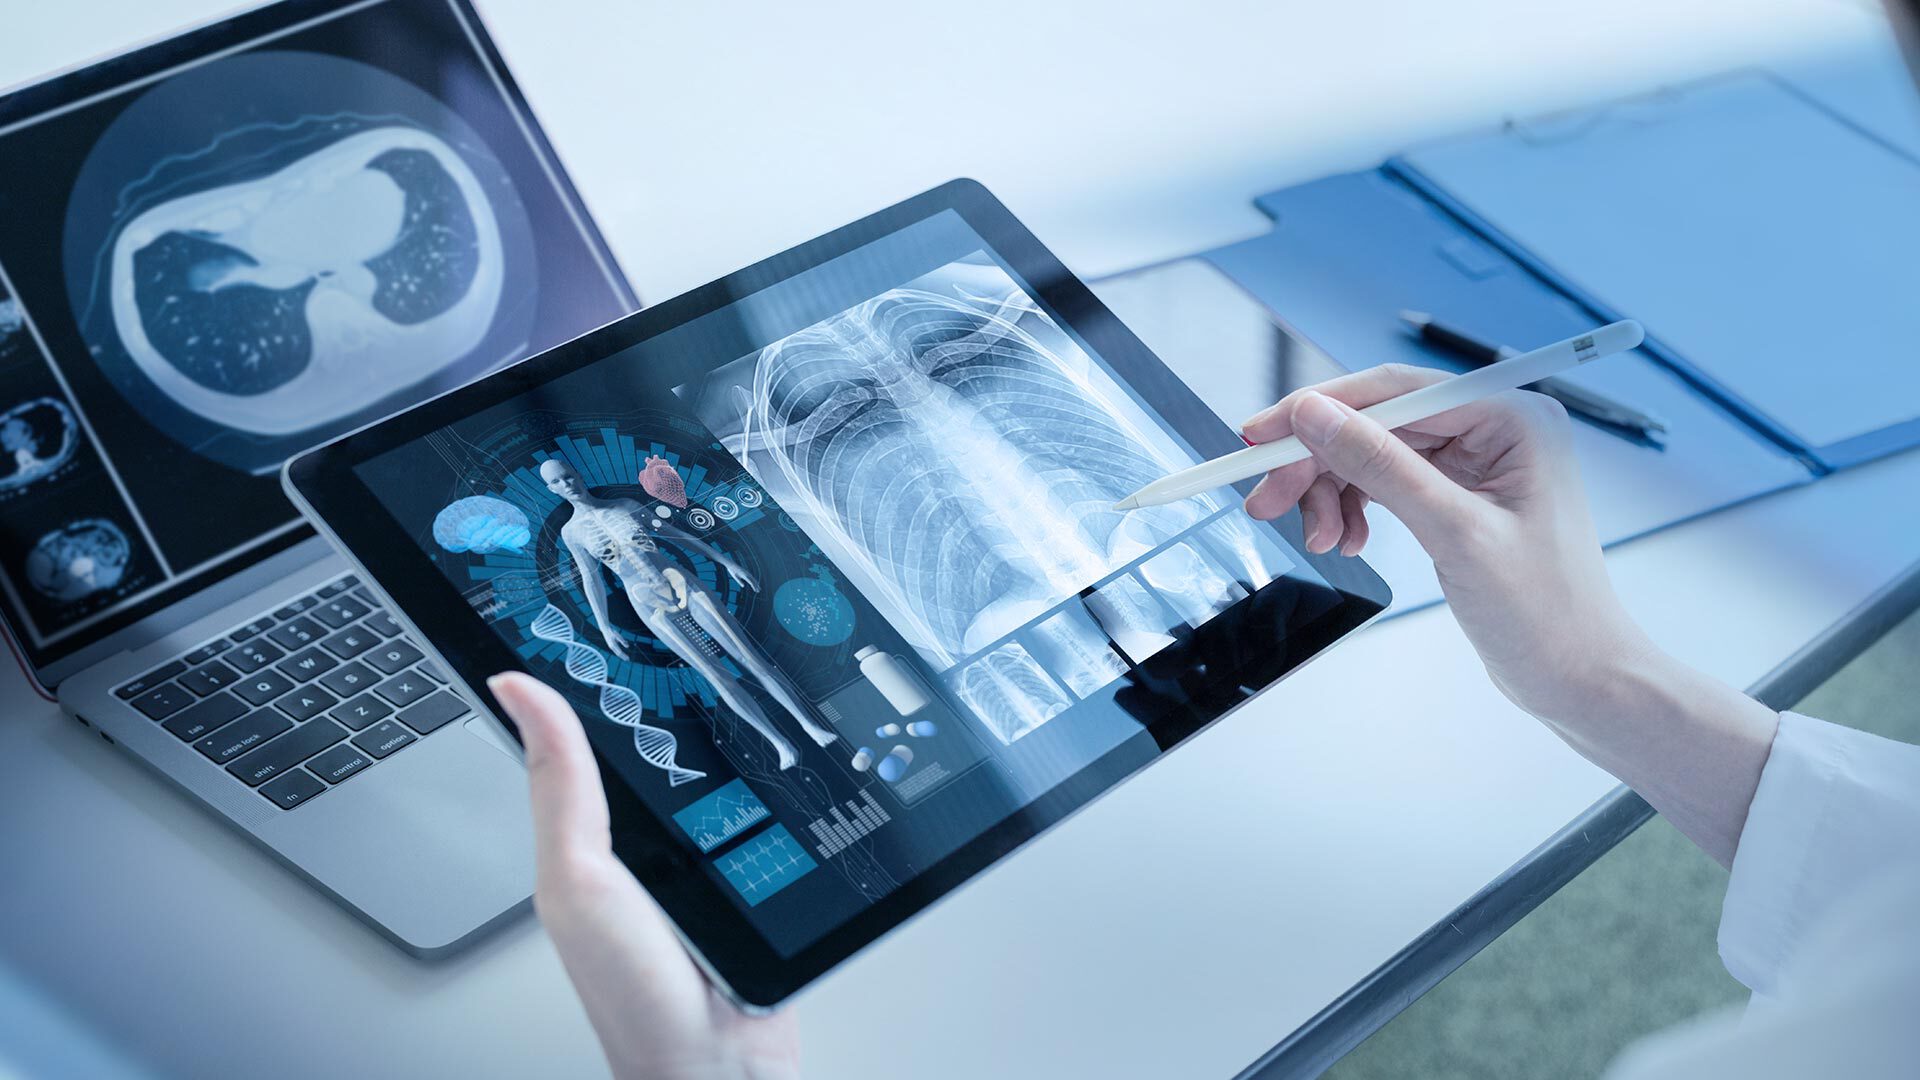 Medical images on a tablet PC